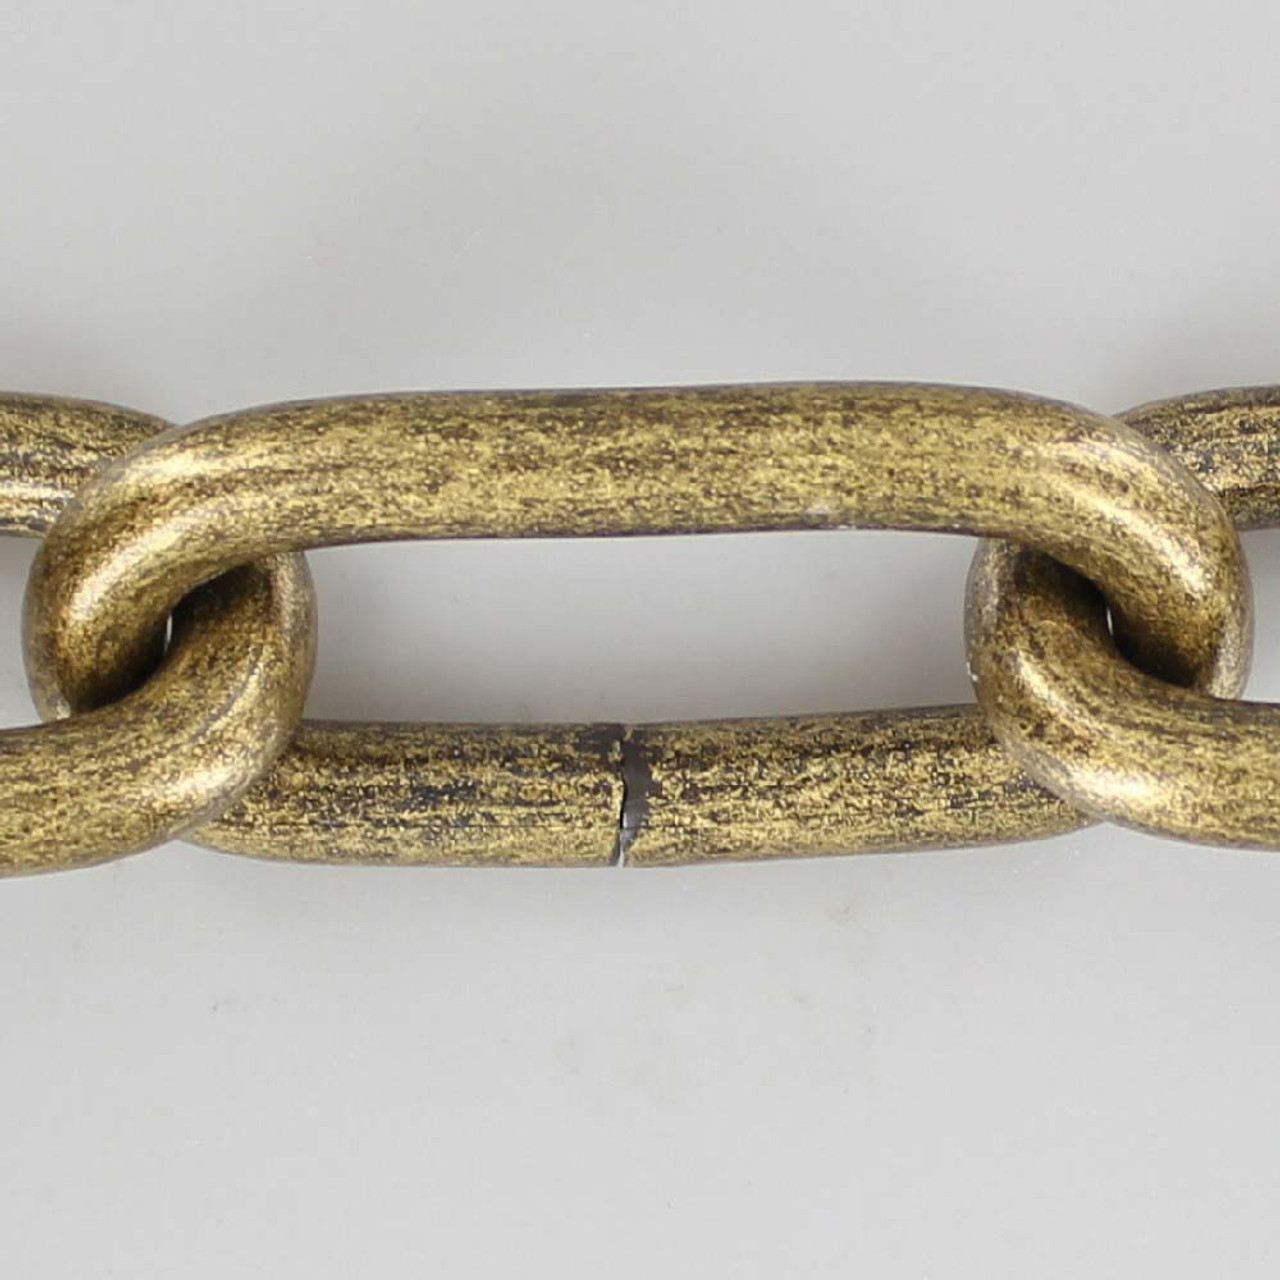 ANTIQUE BRASS Chain Strap - Elongated Box Chain - 5/16 (8mm) Wide - Handle  to Crossbody Lengths